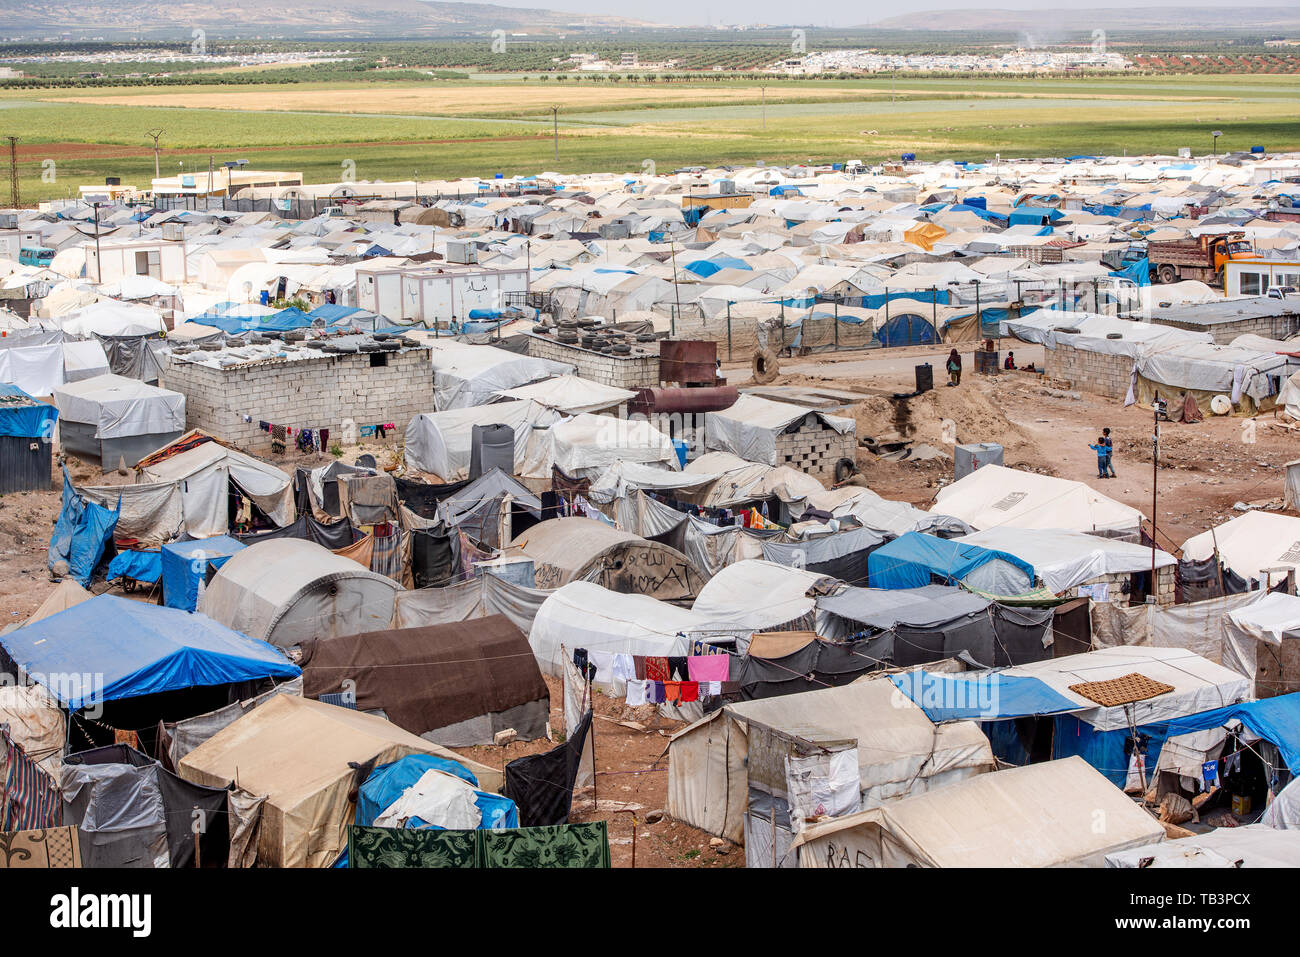 AZEZ, SYRIA – MAY 19: Refugee camp for syrian people on May 19, 2019 in Azez, Syria. In the civil war that began in Syria on 2011, 12 million people w Stock Photo